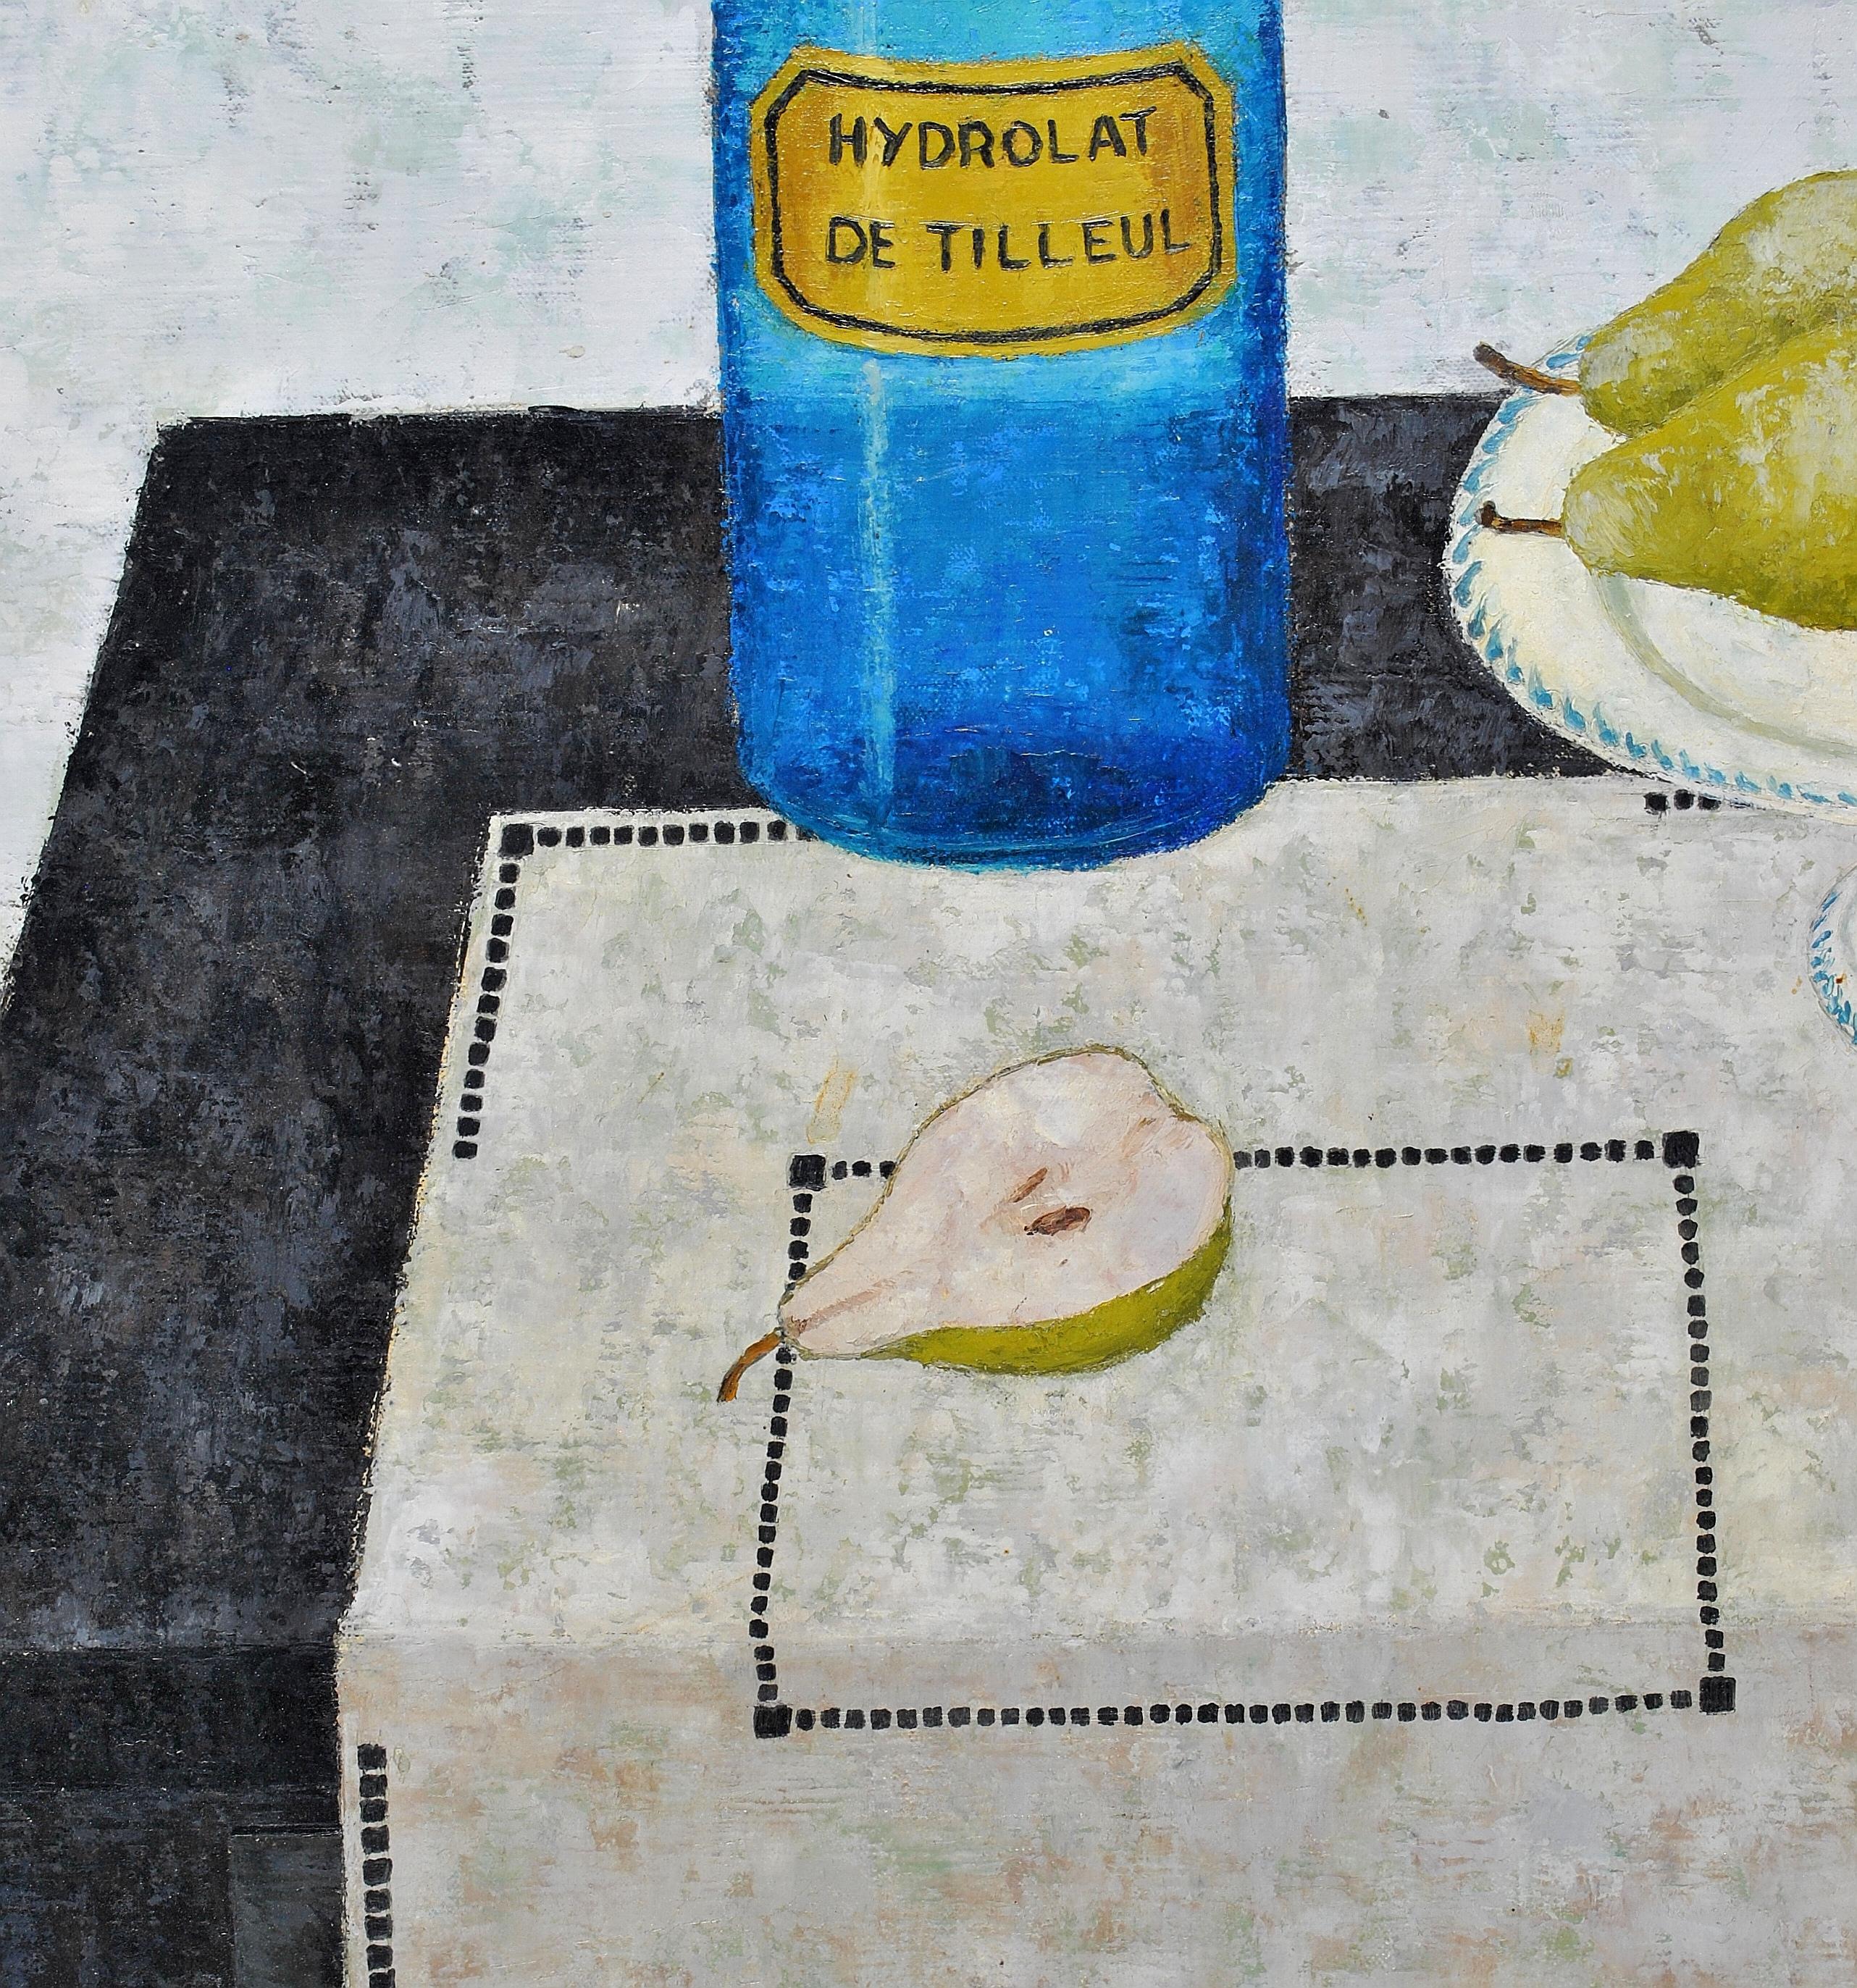 A superb large 1950's French oil on canvas still life depicting pears and a blue apothecary bottle on a table by Peter Orlando. 

Interesting subject painted in the distinctive mid 20th century French Naïf style by a noted artist who has a museum